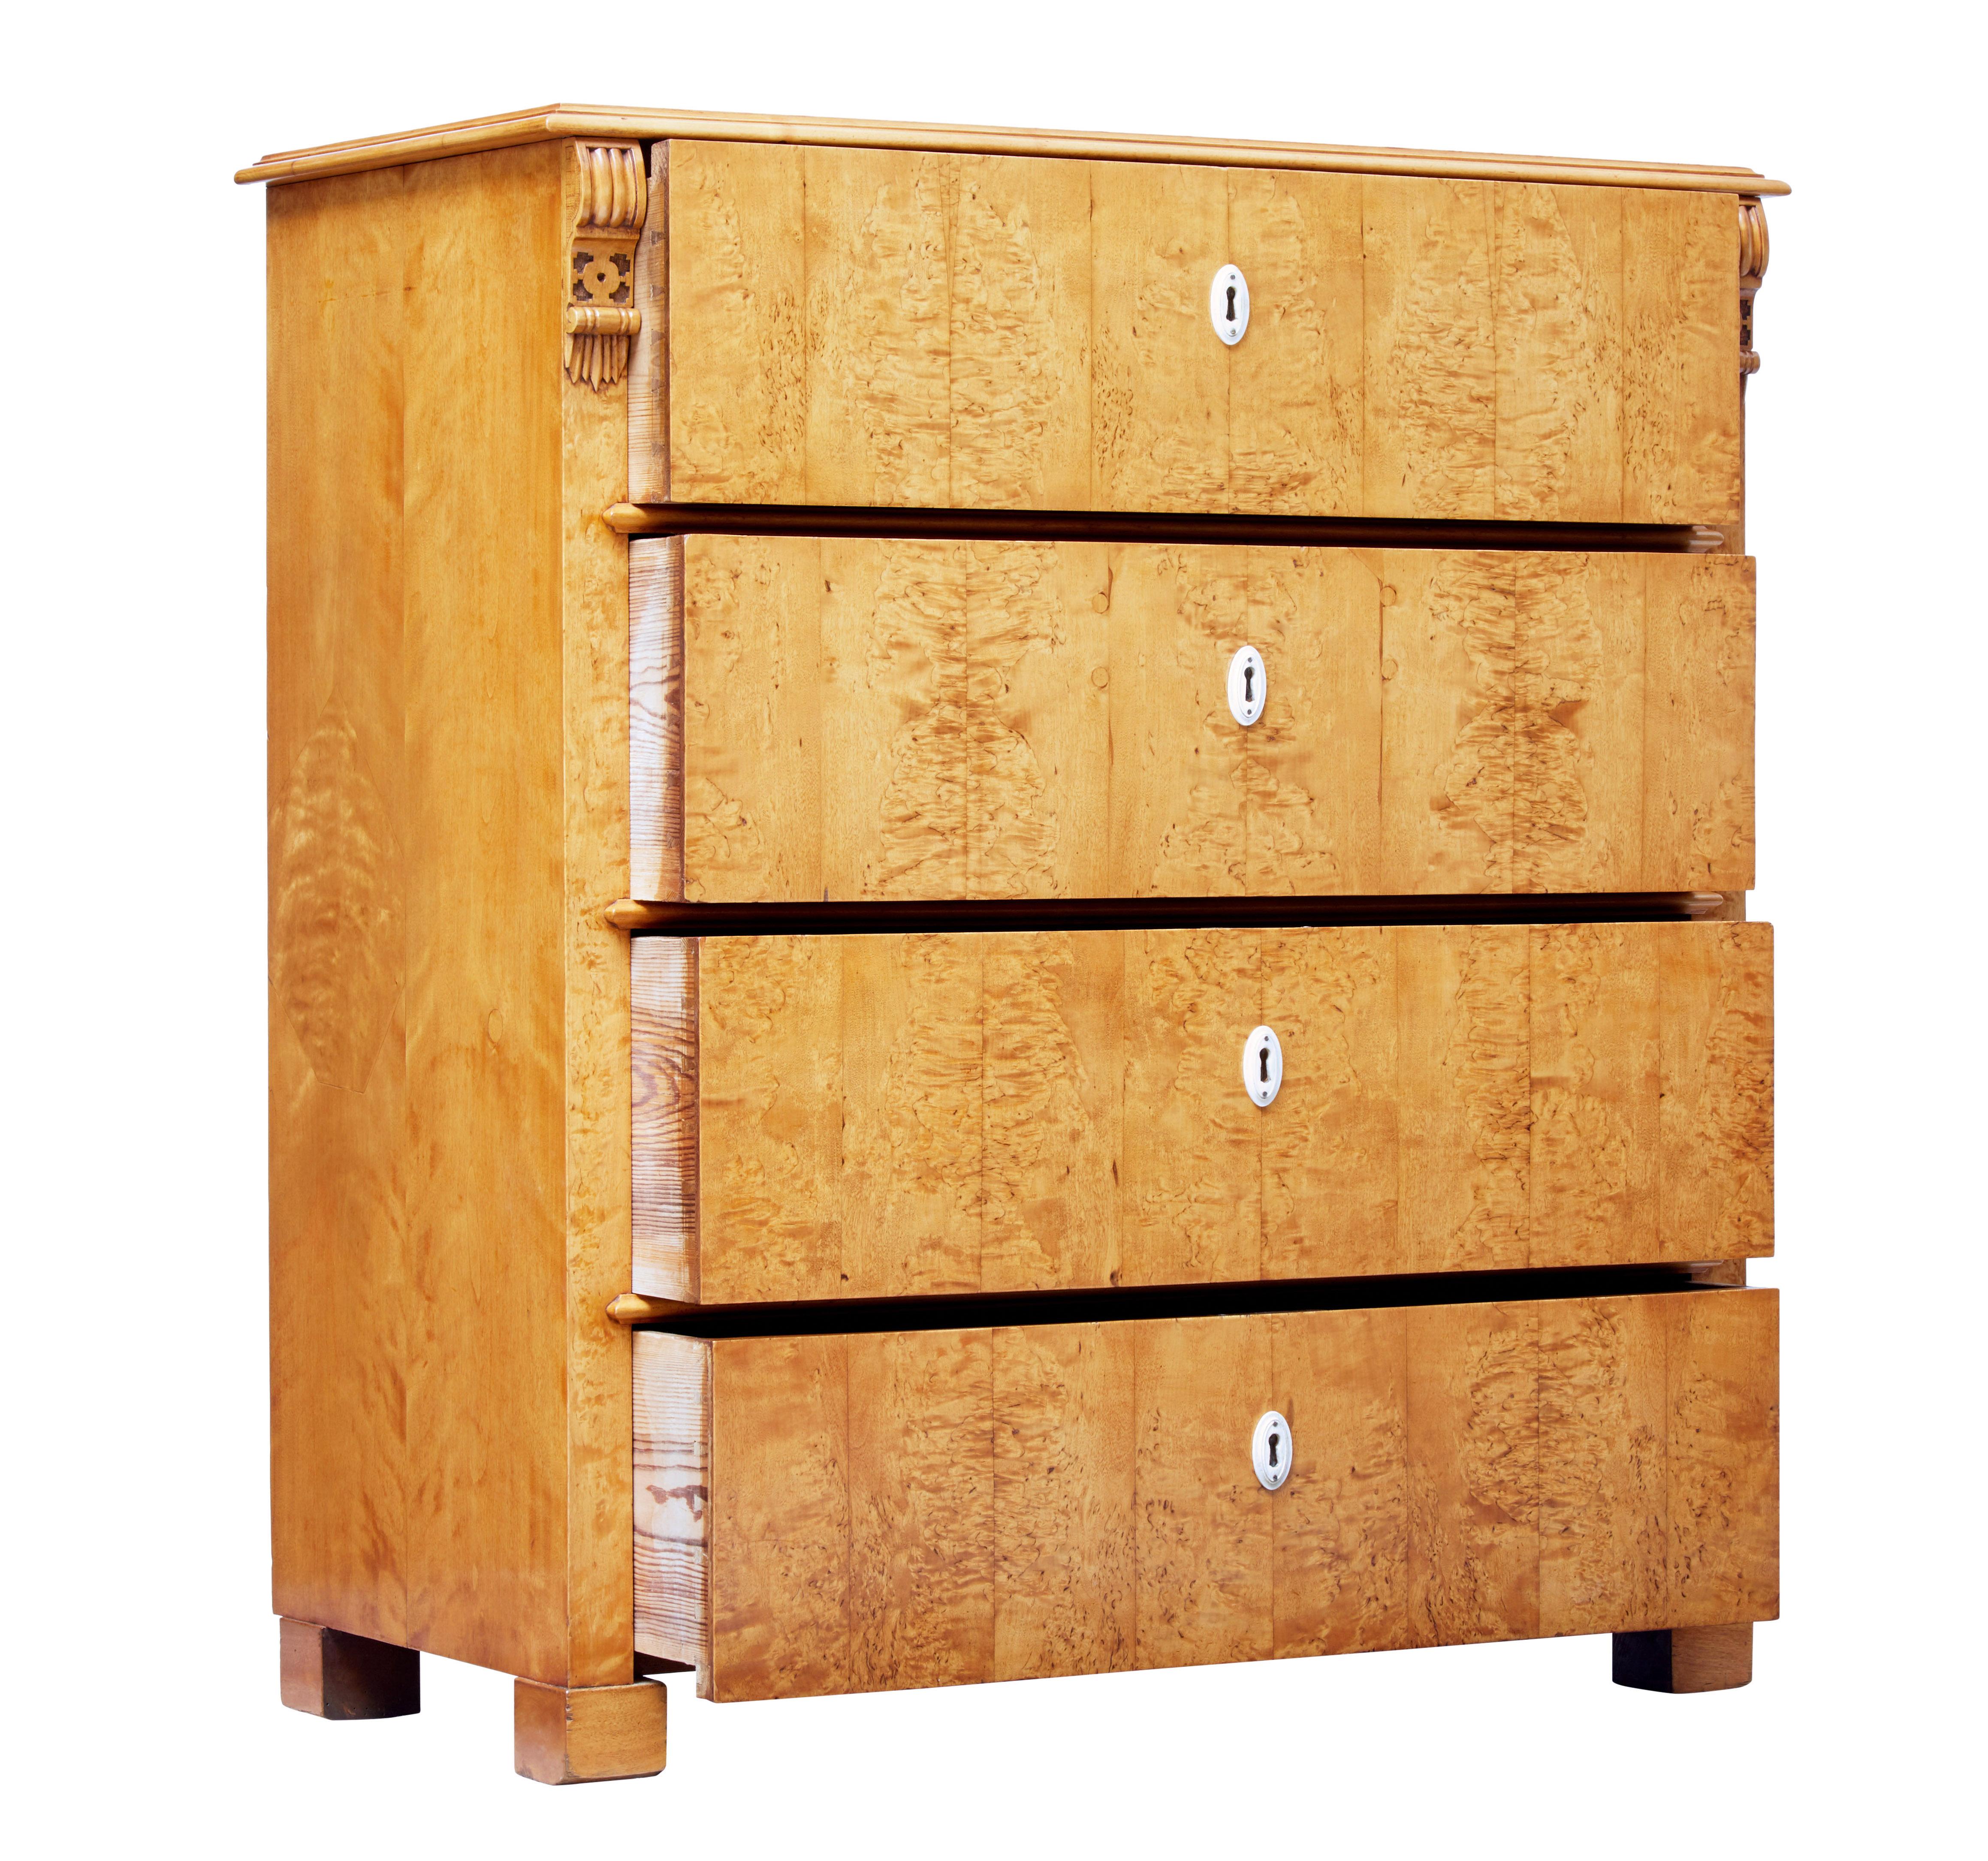 19th century swedish birch root chest of drawers circa 1880.

4 equal proportioned drawers, each veneered in birch root.  Typical with scandinavian furniture of this period in that the drawers open on the key and have no handles.  Handles could be